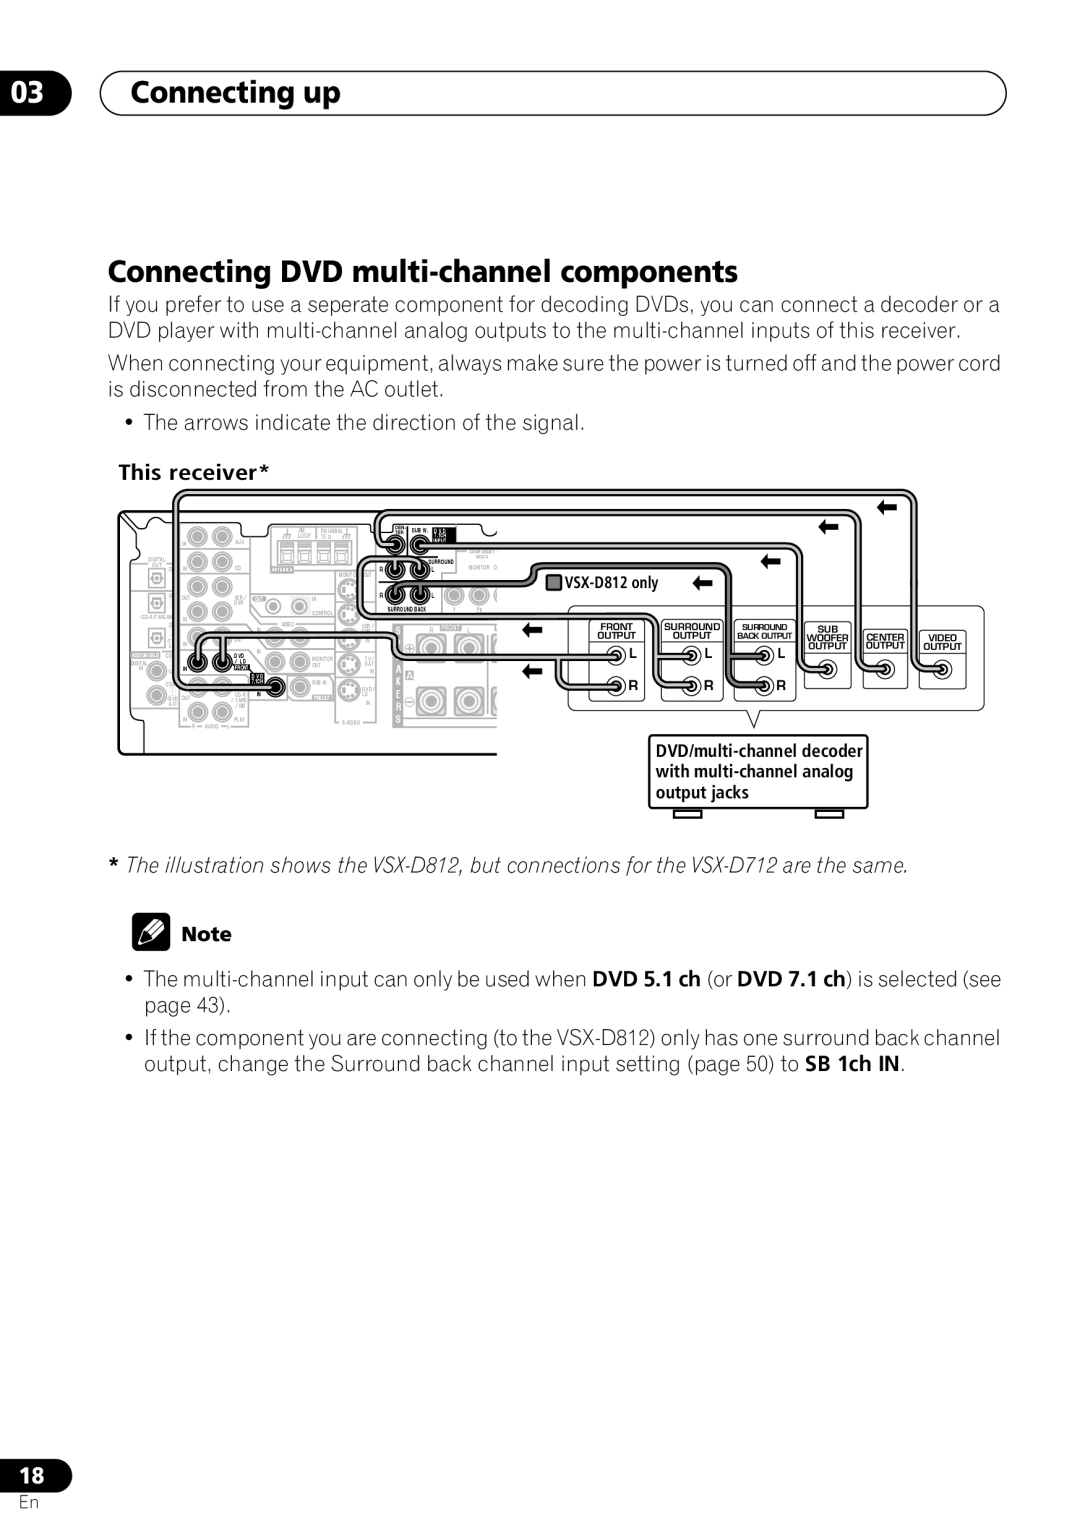 Pioneer VSX-D712 manual 03Connecting up, Connecting DVD multi-channelcomponents 